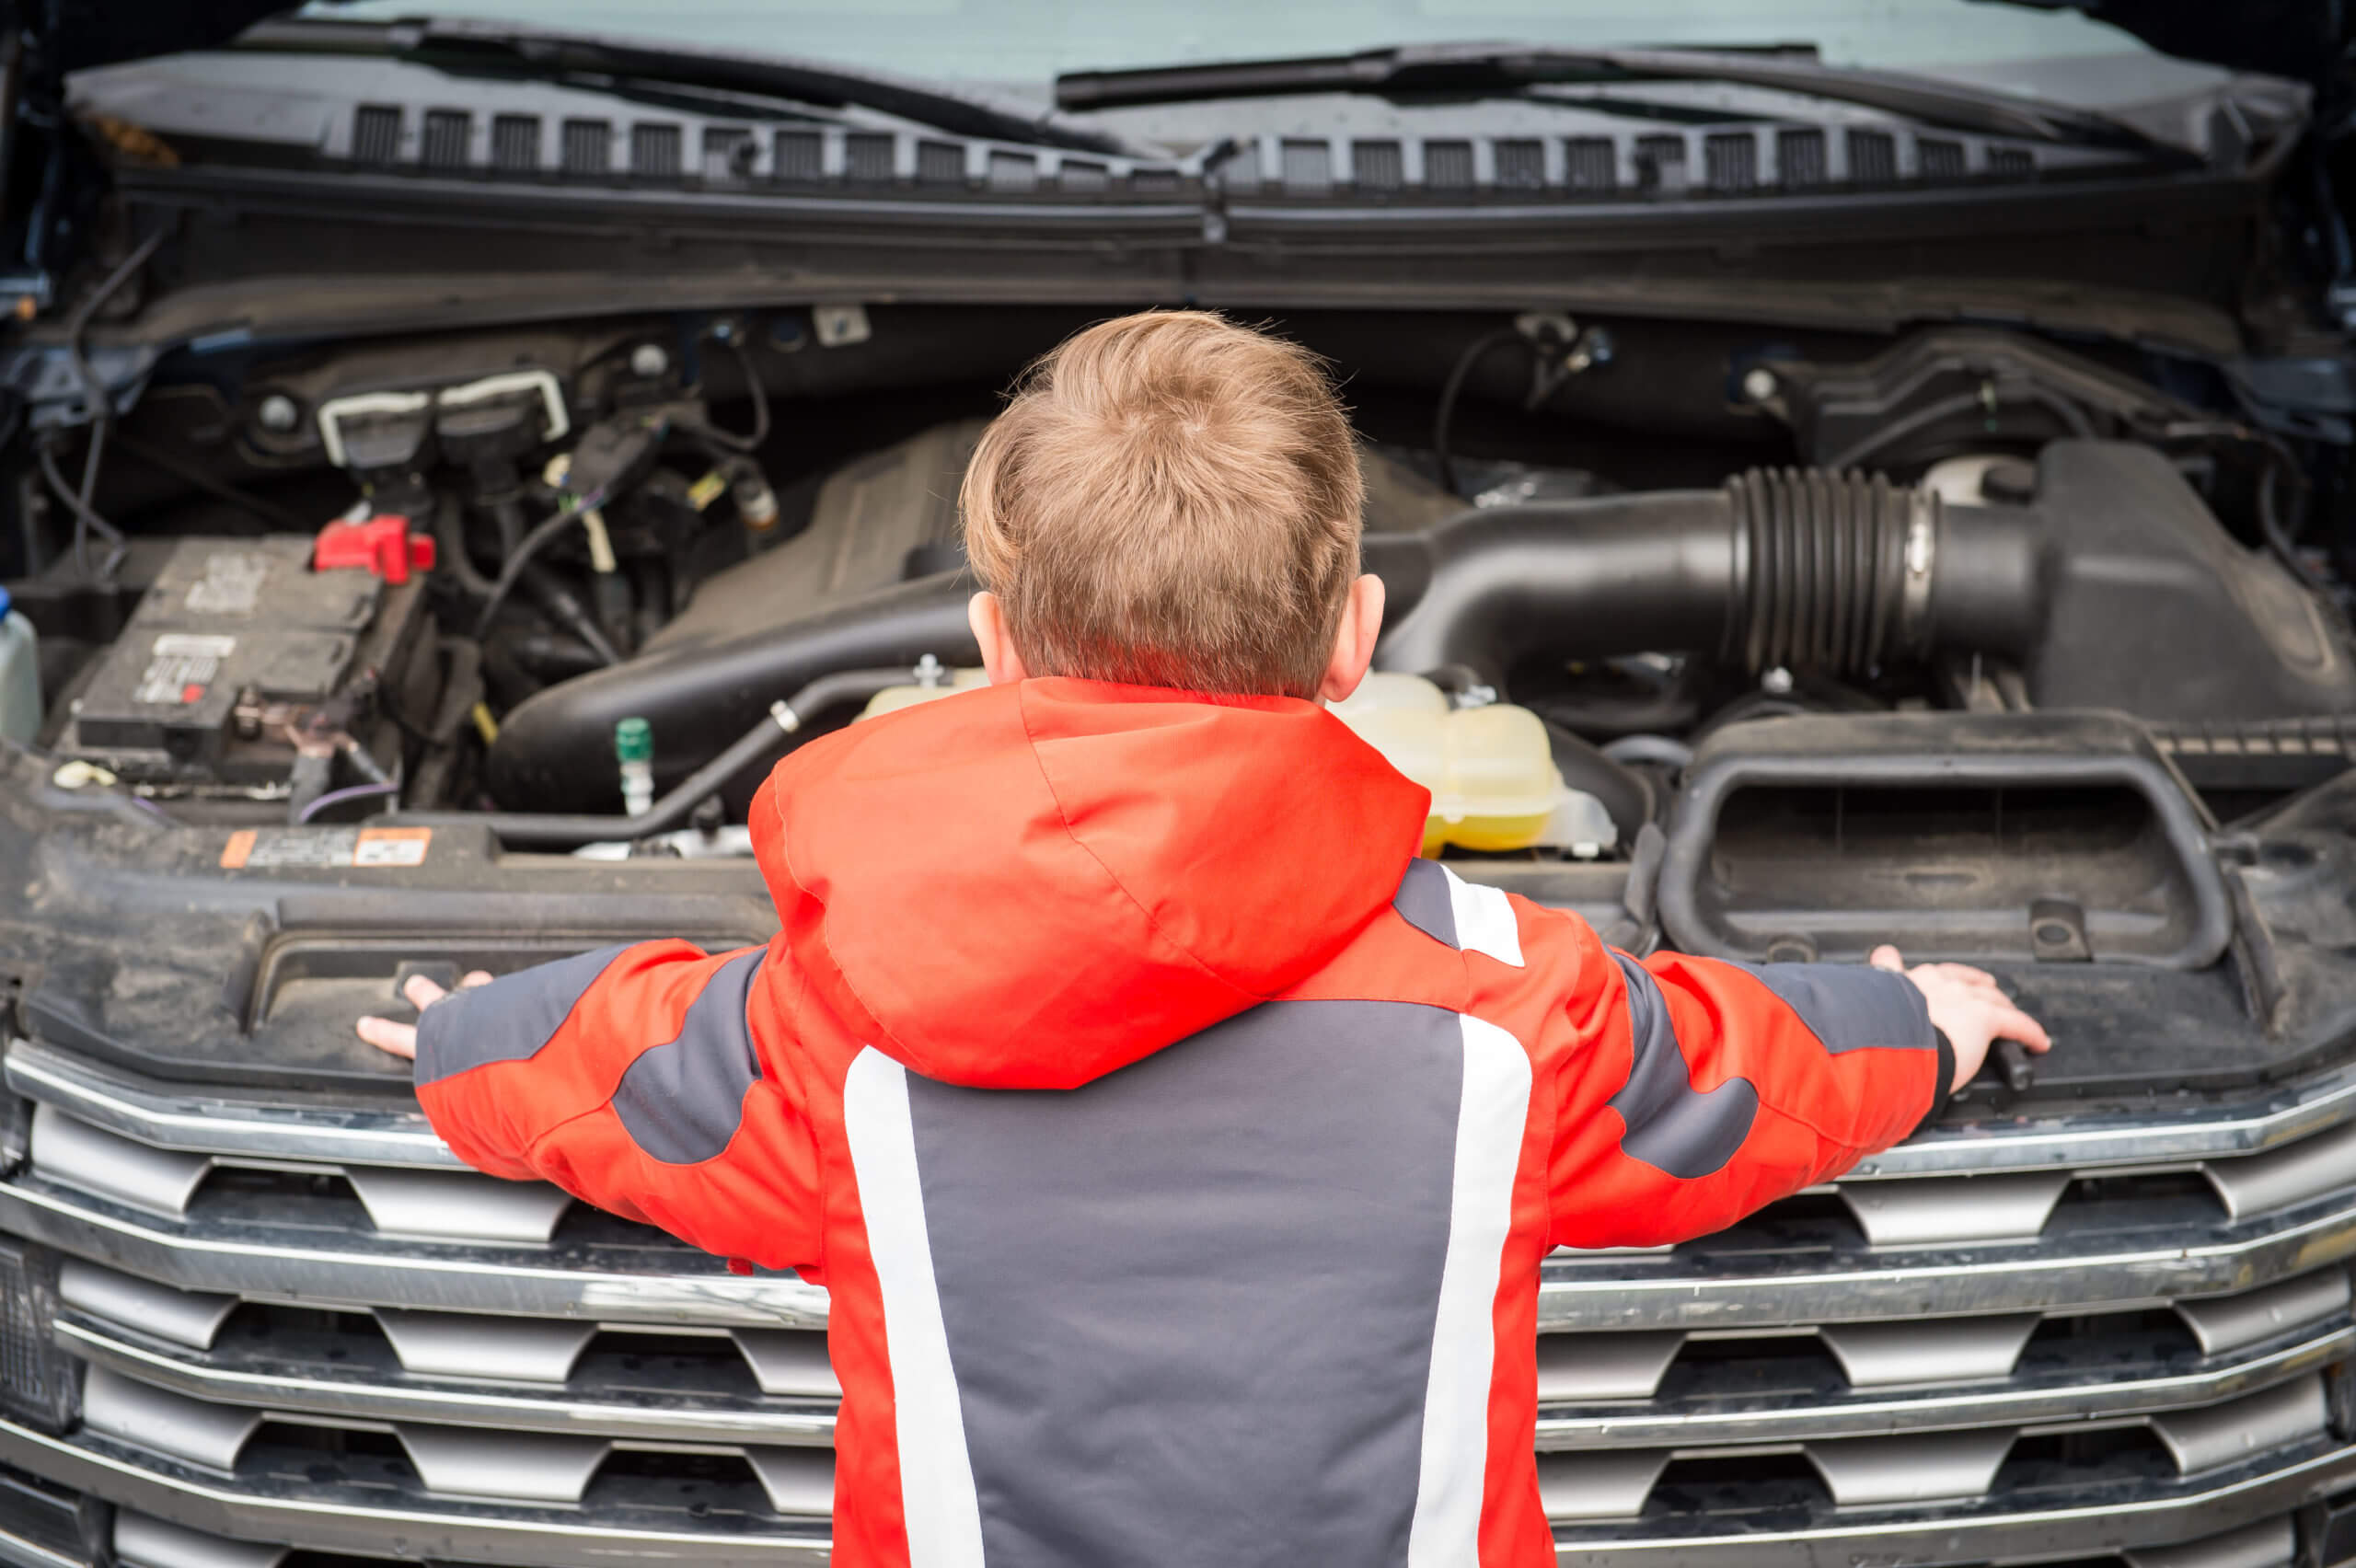 A boy stands looking down under the open hood of a vehicle.